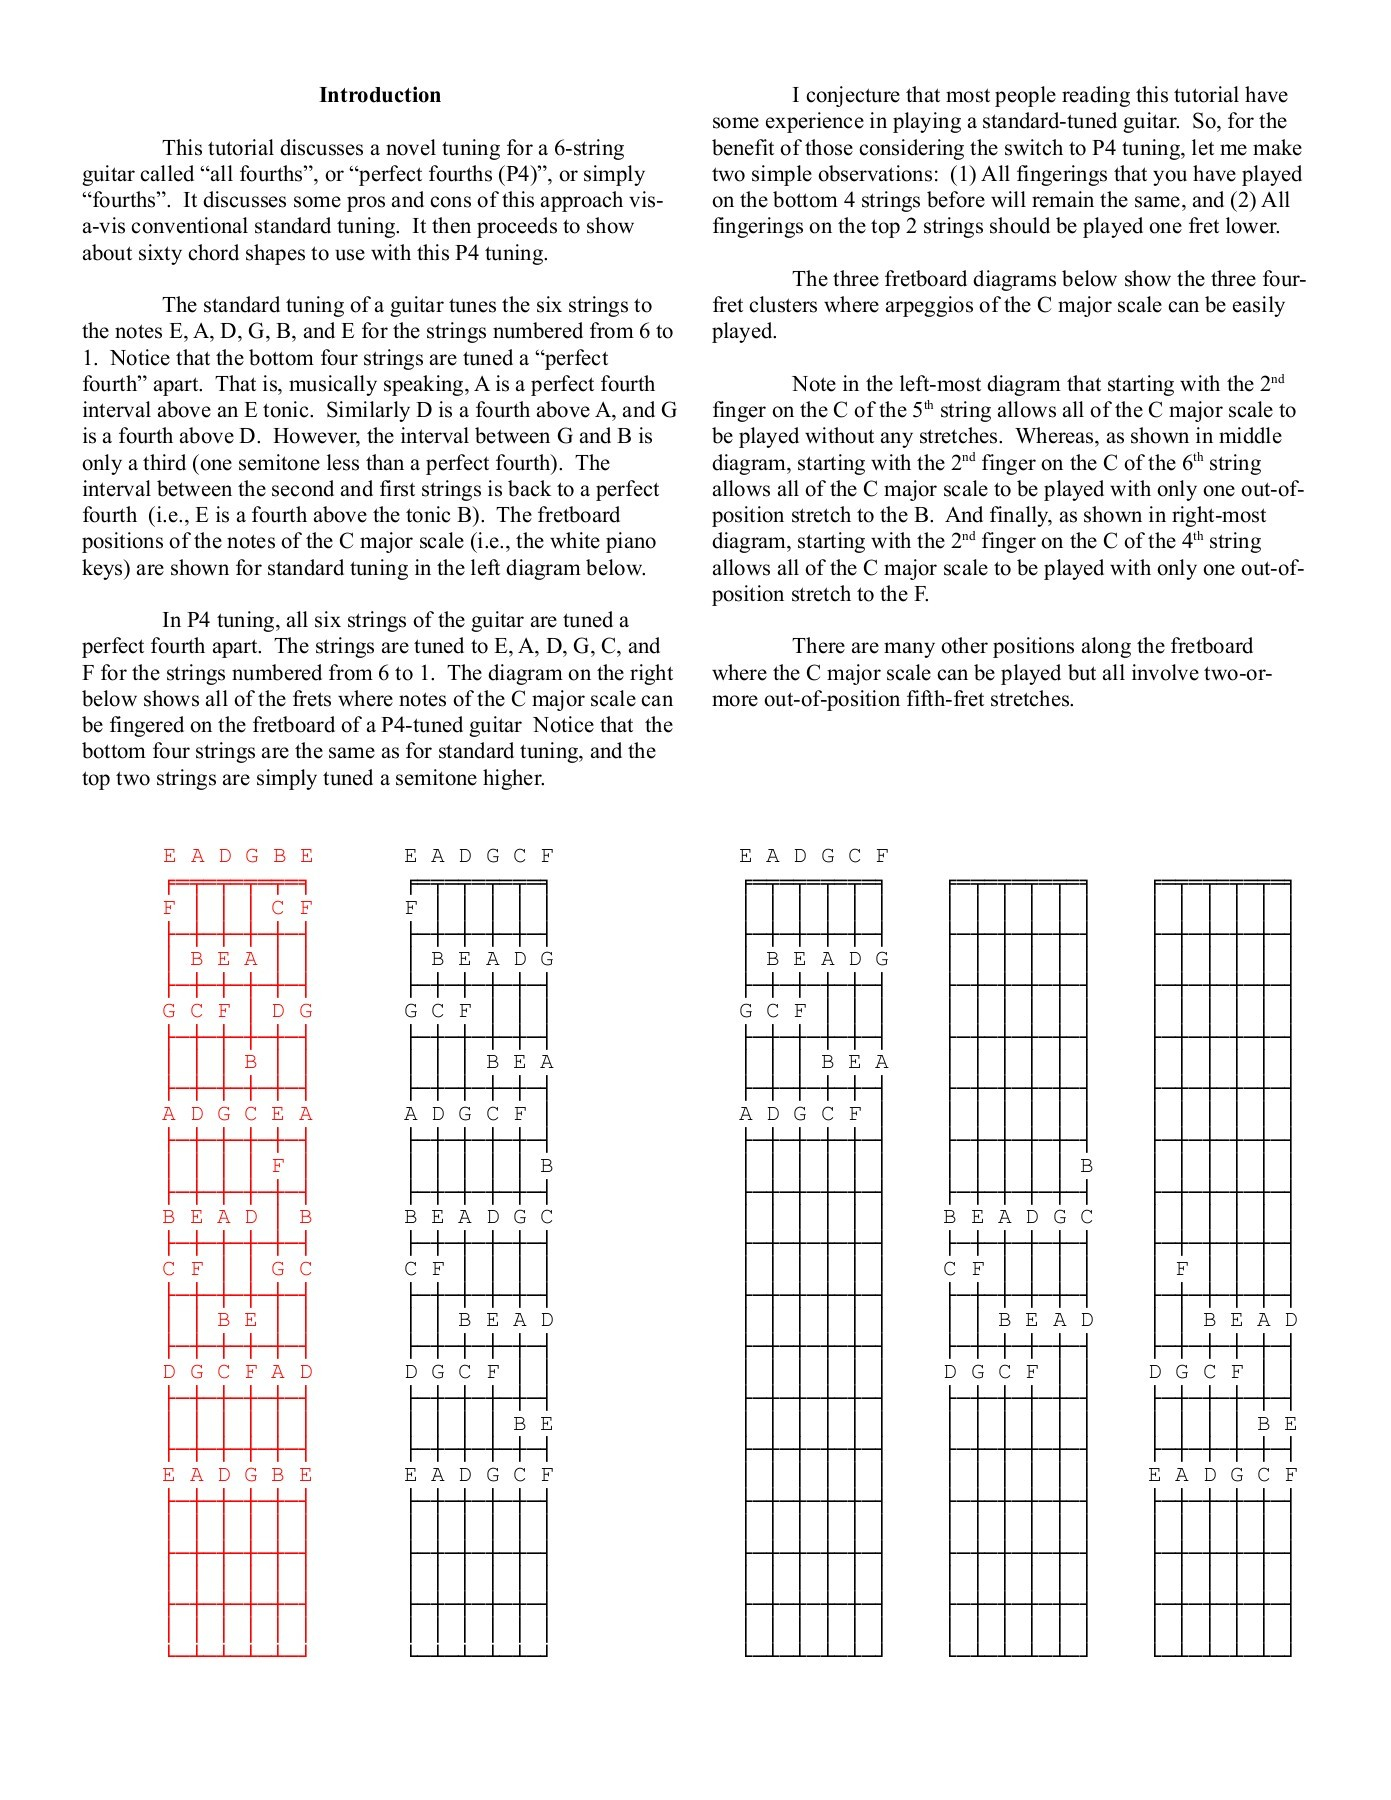 All Guitar Chords Sixty Guitar Chords For All Fourths Tuning Pages 1 20 Text